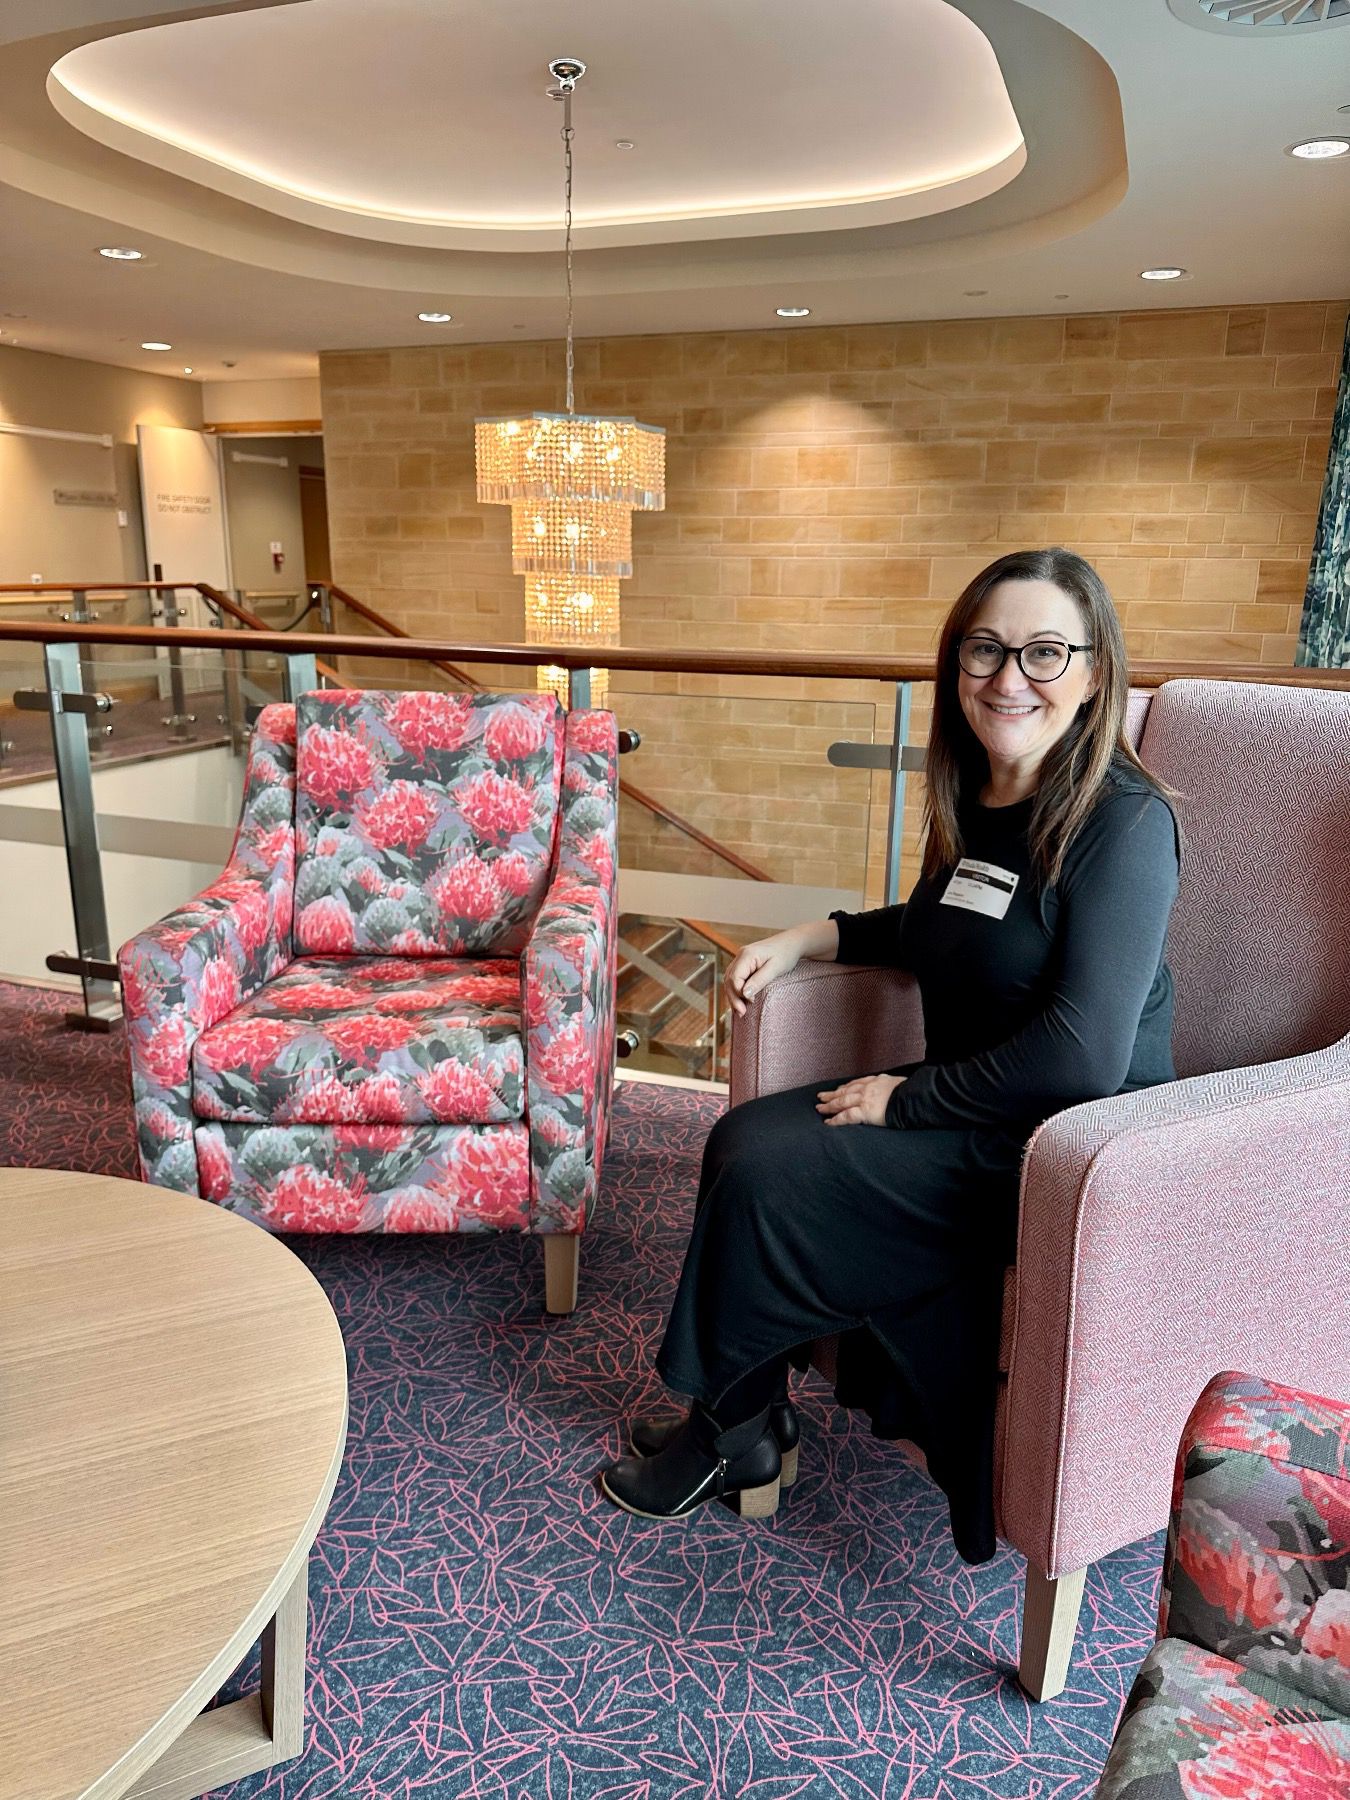 importance of design in an aged care setting. Lisa, our senior design consultant, in custom upholstered chairs.